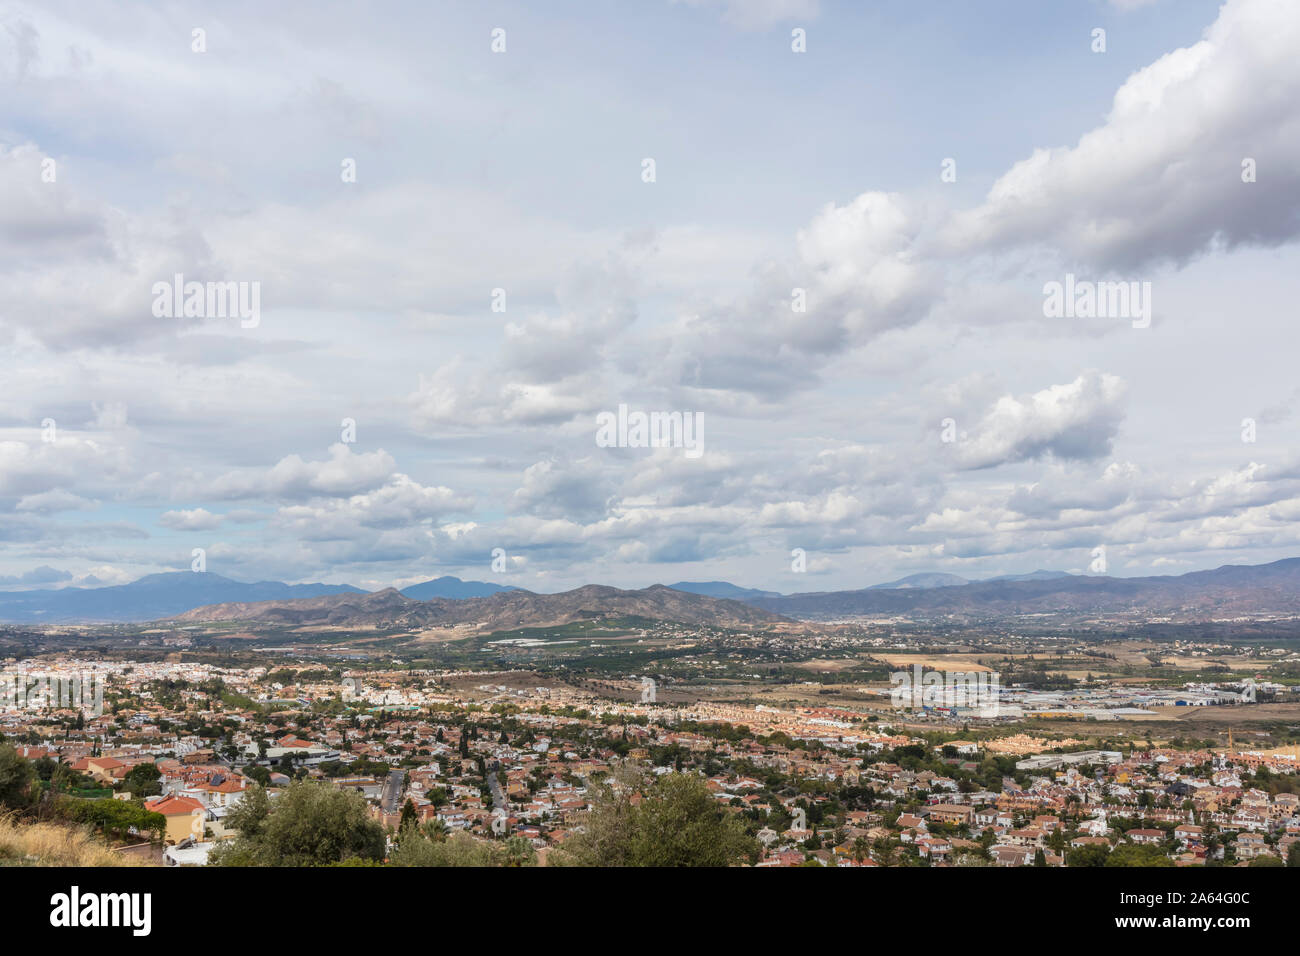 Panorama of Alhaurin de la Torre and its landscape in Malaga, Andalusia, Spain Stock Photo